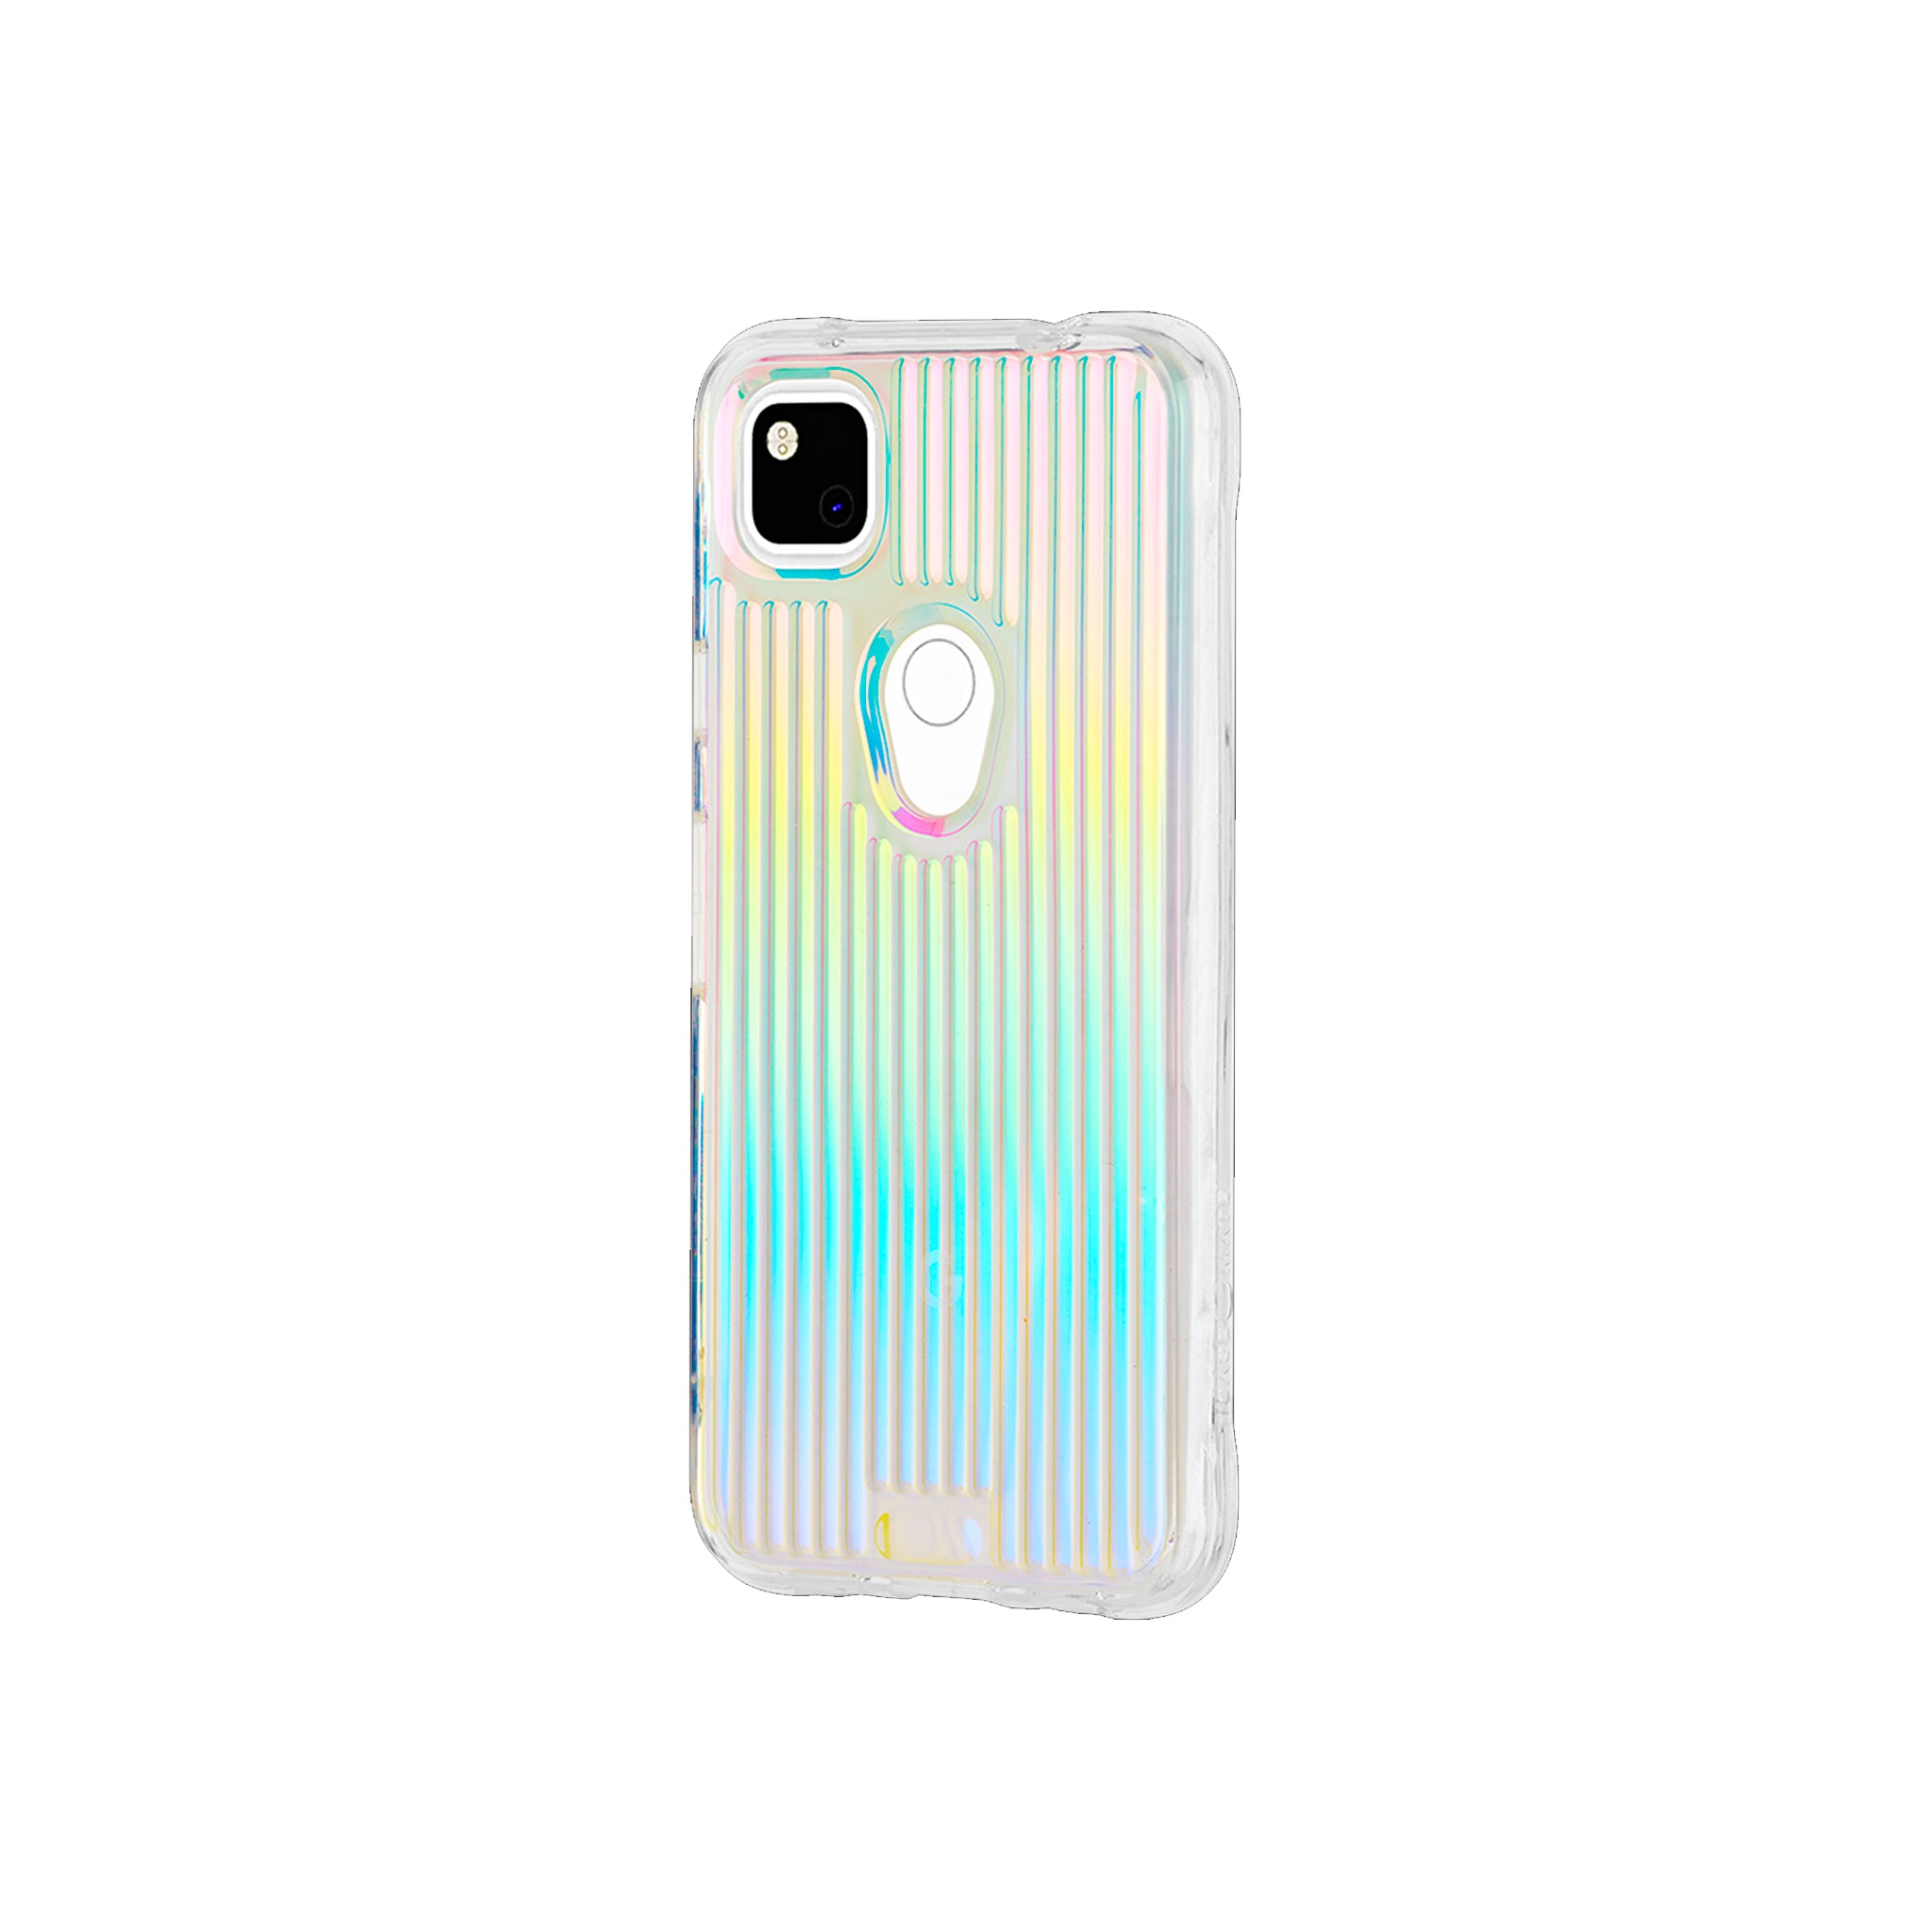 Case-mate - Tough Groove Case For Google Pixel 4a - Iridescent